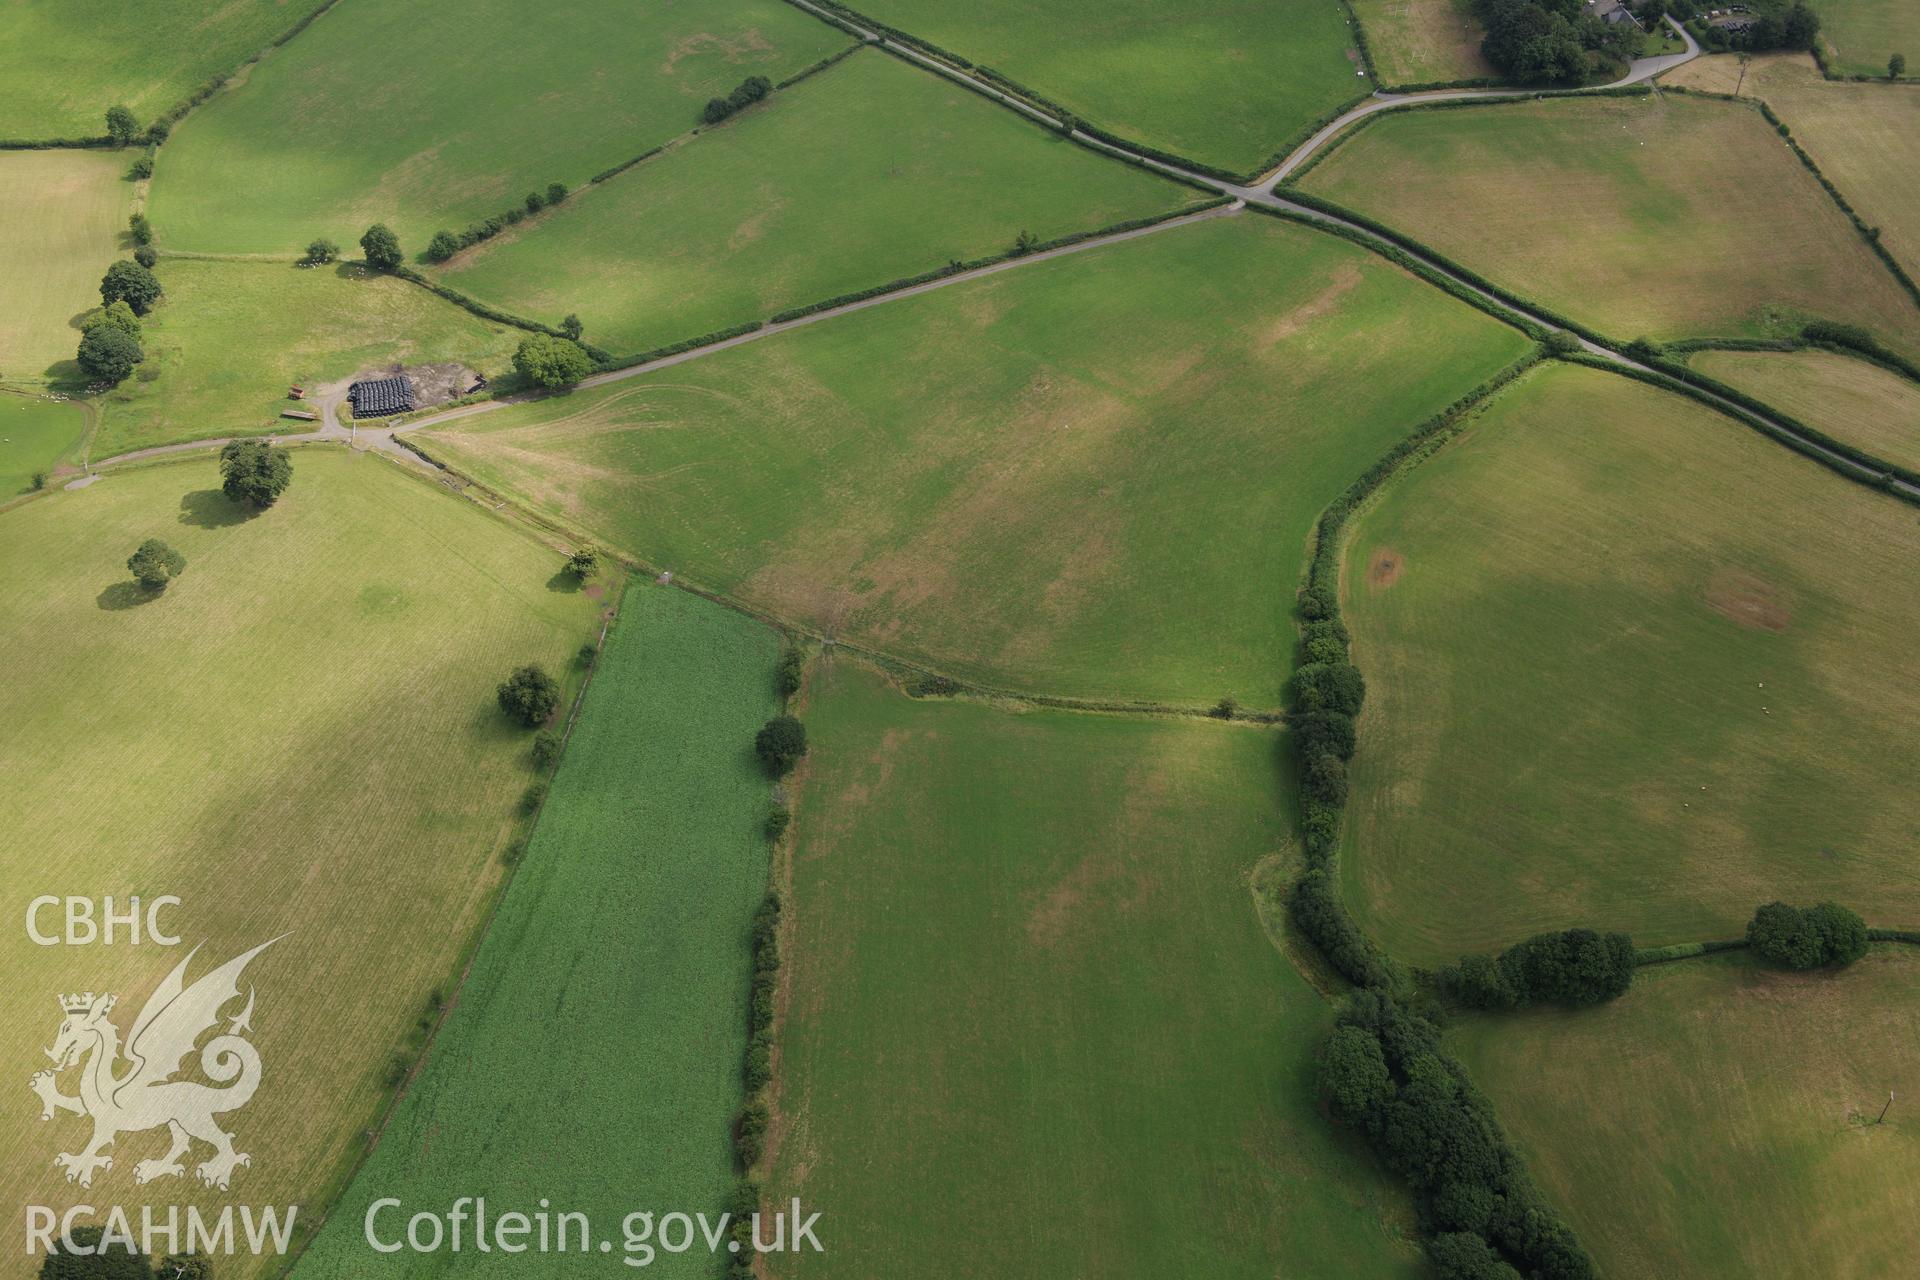 Cropmarks of Roman camp west of Caerau Roman fort and possible square ditched barrow, Beulah, west of Builth Wells. Oblique aerial photograph taken during the Royal Commission?s programme of archaeological aerial reconnaissance by Toby Driver on 1st August 2013.